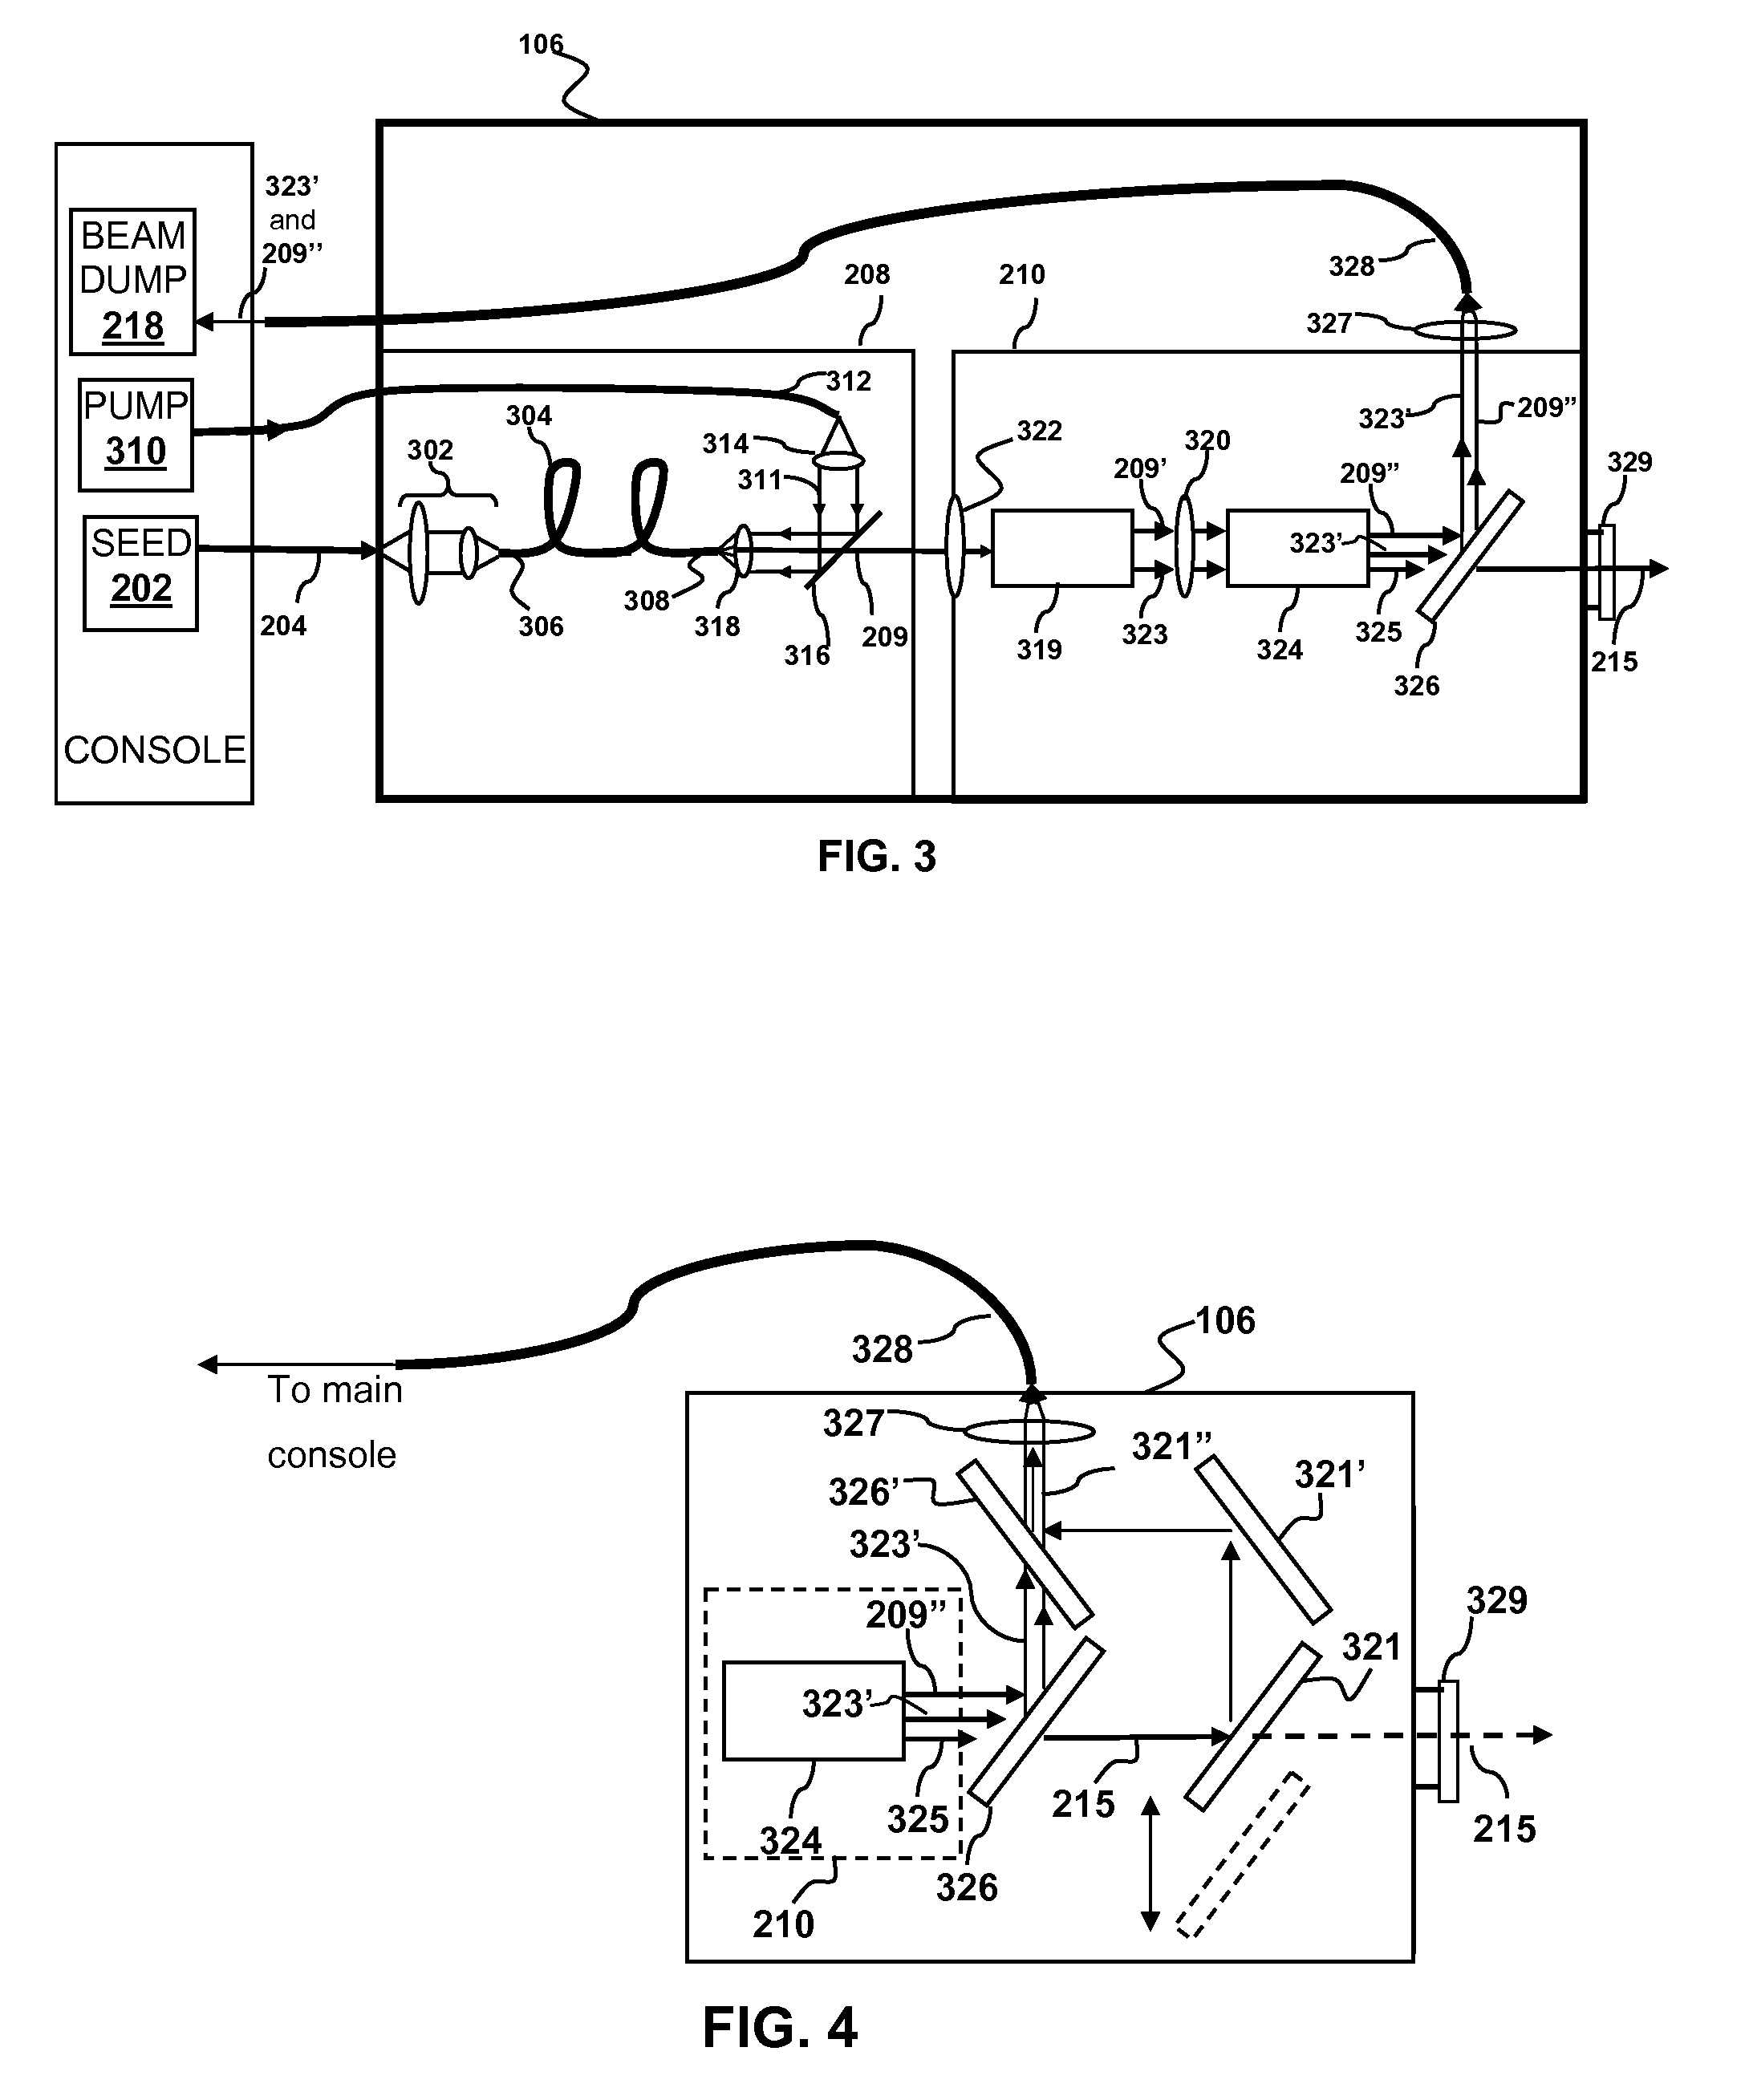 Reducing thermal load on optical head